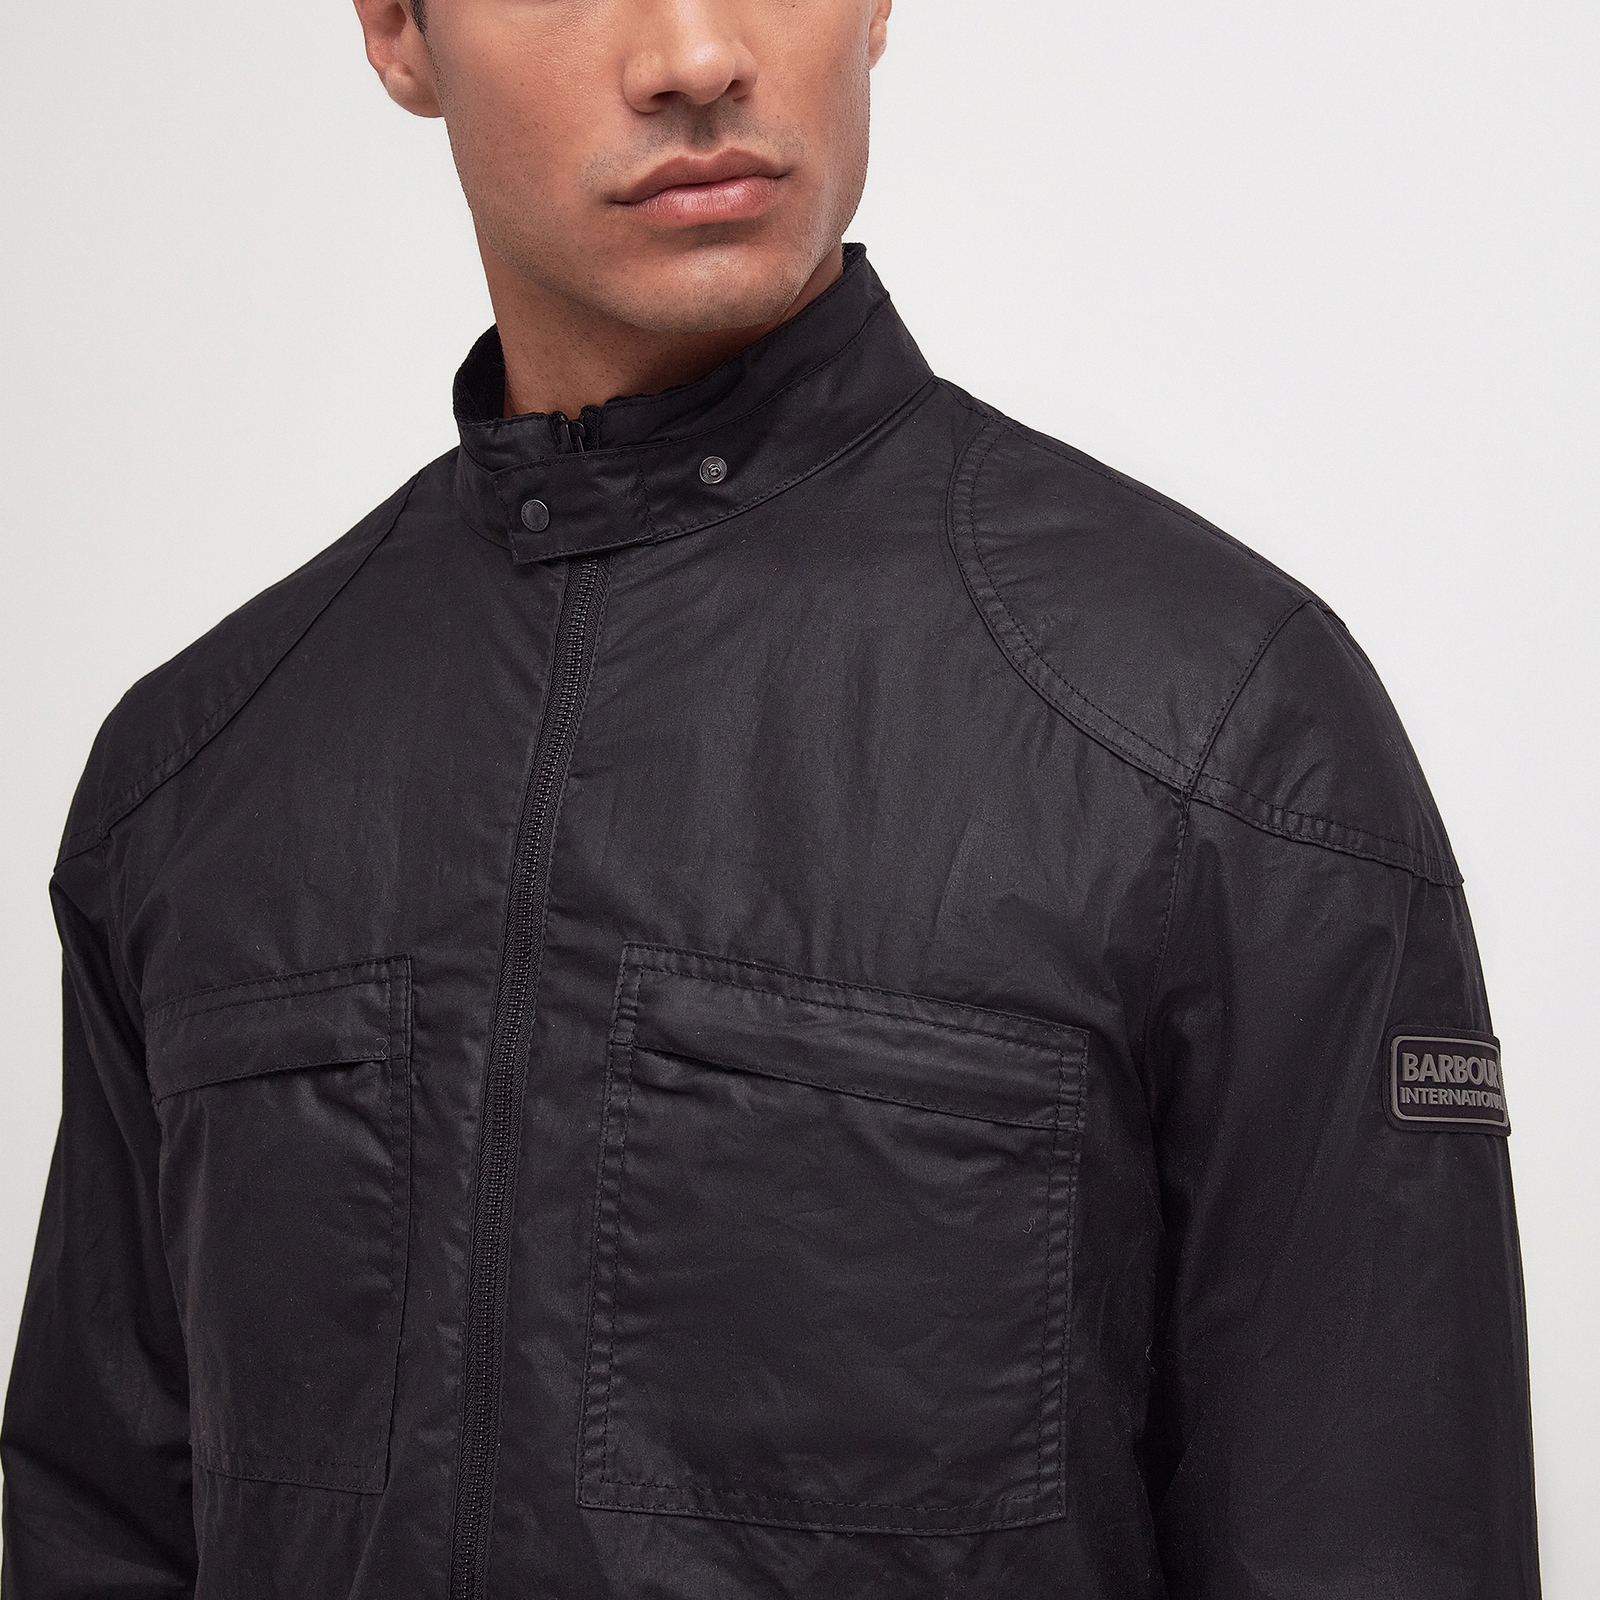 barbour international eastbow waxed cotton jacket - s